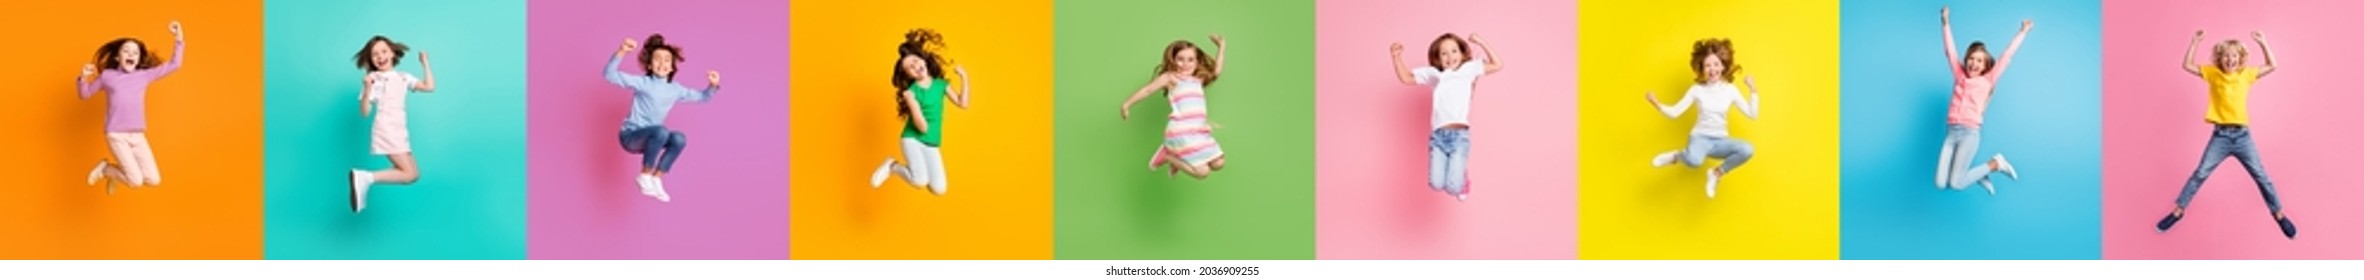 Collage photo diversity race friendly little kids boys girls jumping up win shopping discounts isolated over colored background